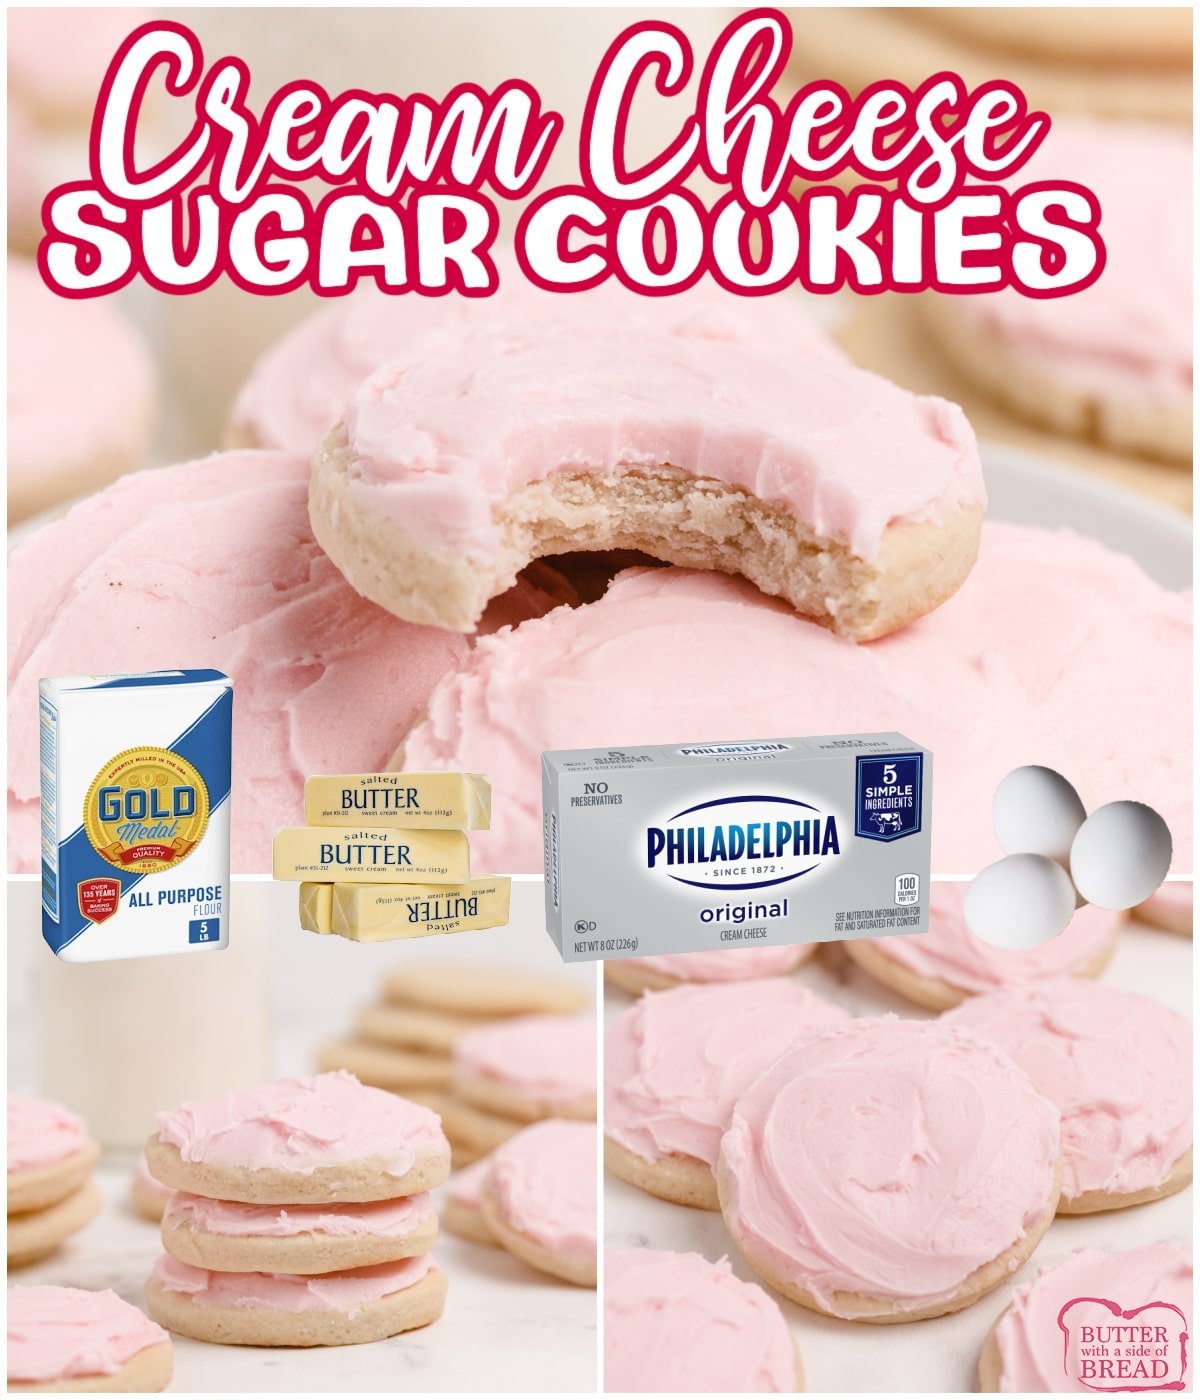 Cream Cheese Sugar Cookies are thick and soft...essentially the best sugar cookie recipe ever! Simple sugar cookie recipe that can be made as a drop cookie or rolled out and cut into shapes. The simple buttercream frosting on top is absolutely perfect too! 